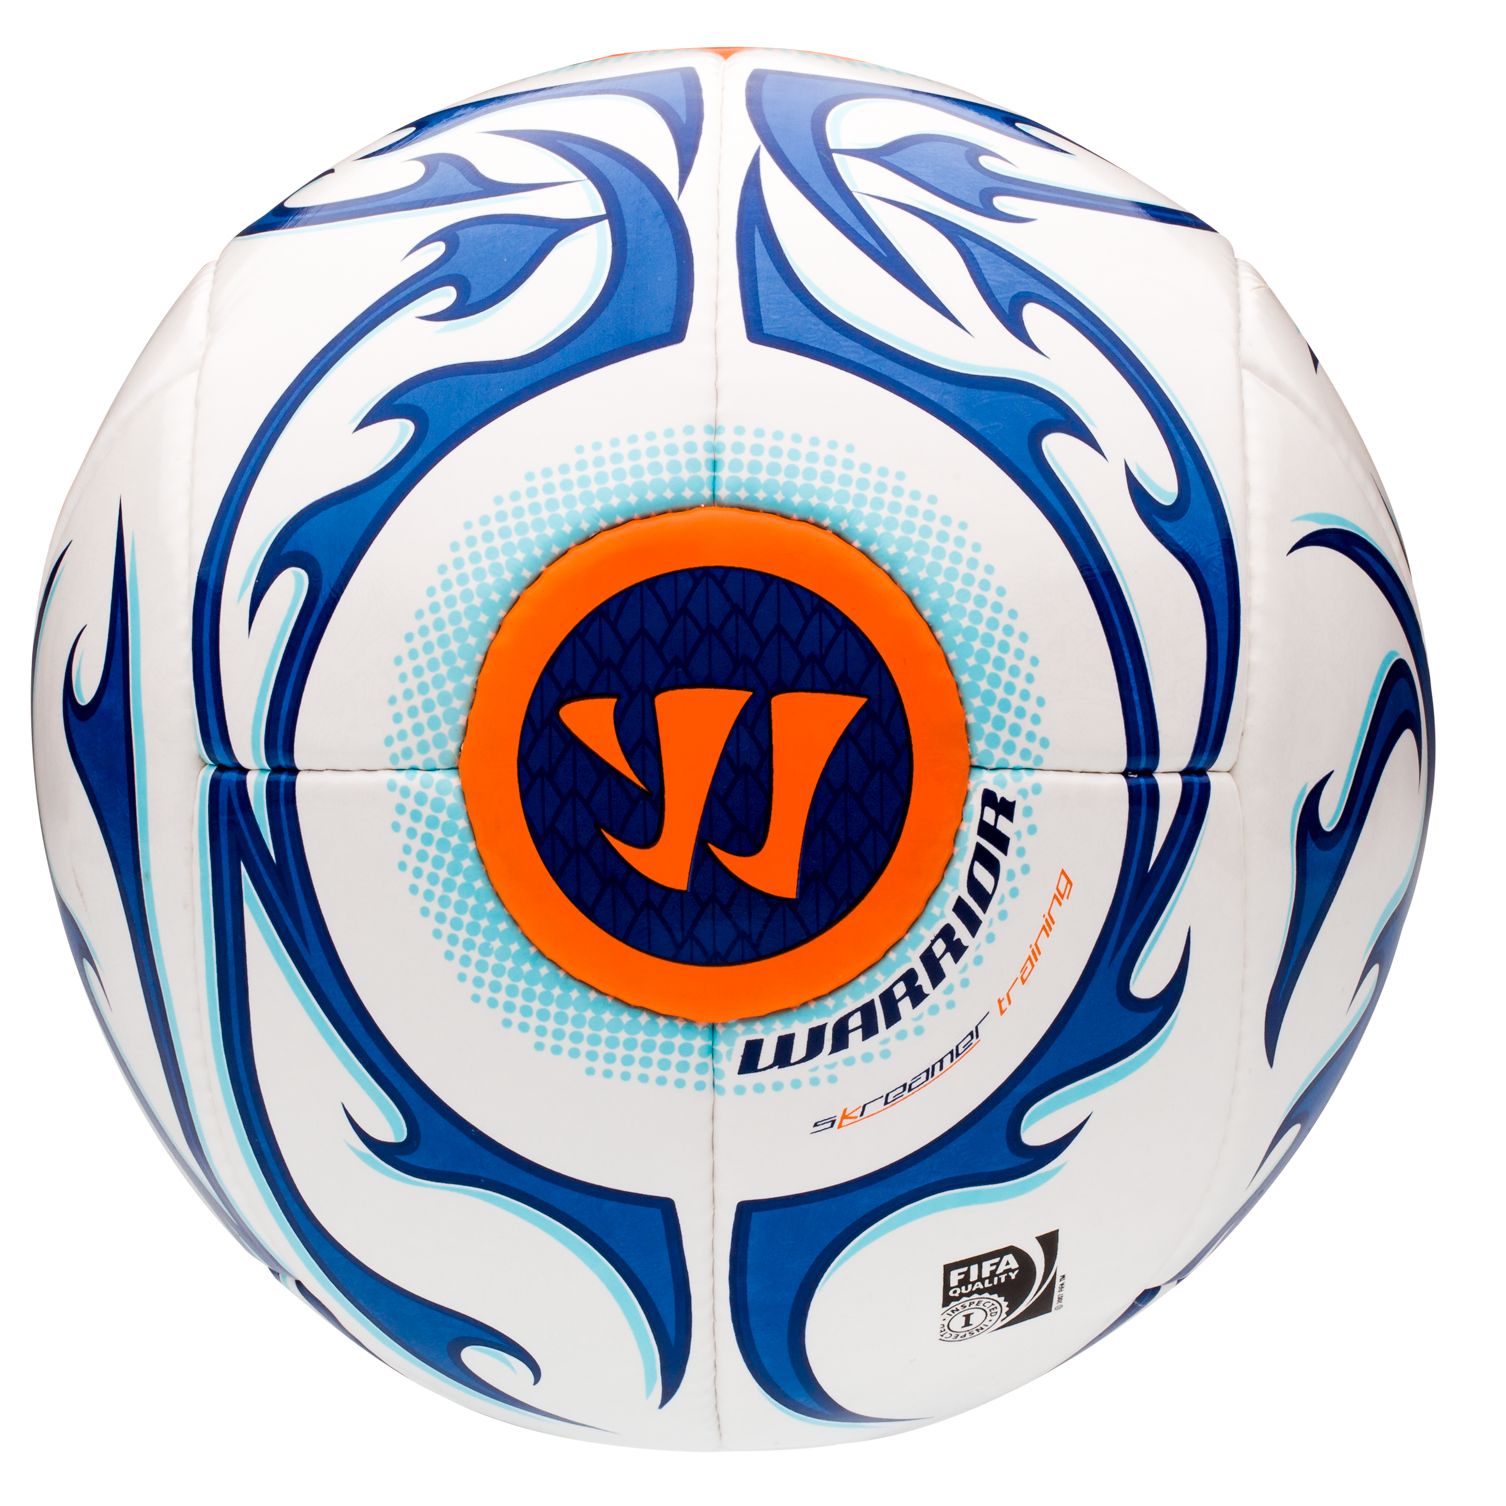 Skreamer Training Ball, White with Blue Radiance & Insignia Blue image number 0